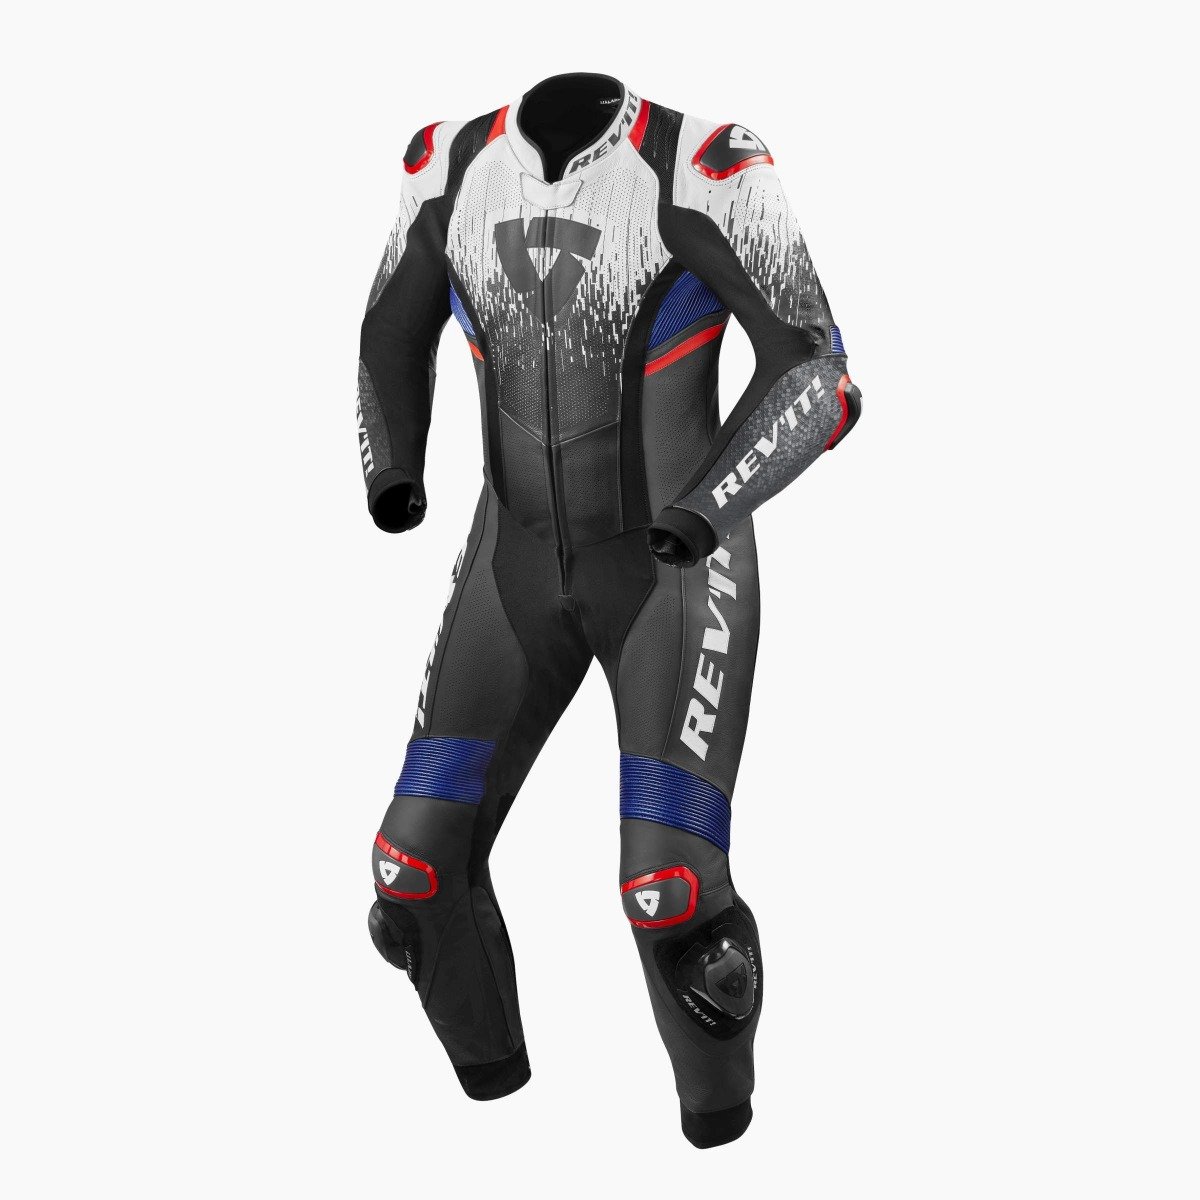 Image of REV'IT! Quantum 2 One Piece Racing Suit White Blue Size 50 ID 8700001313476